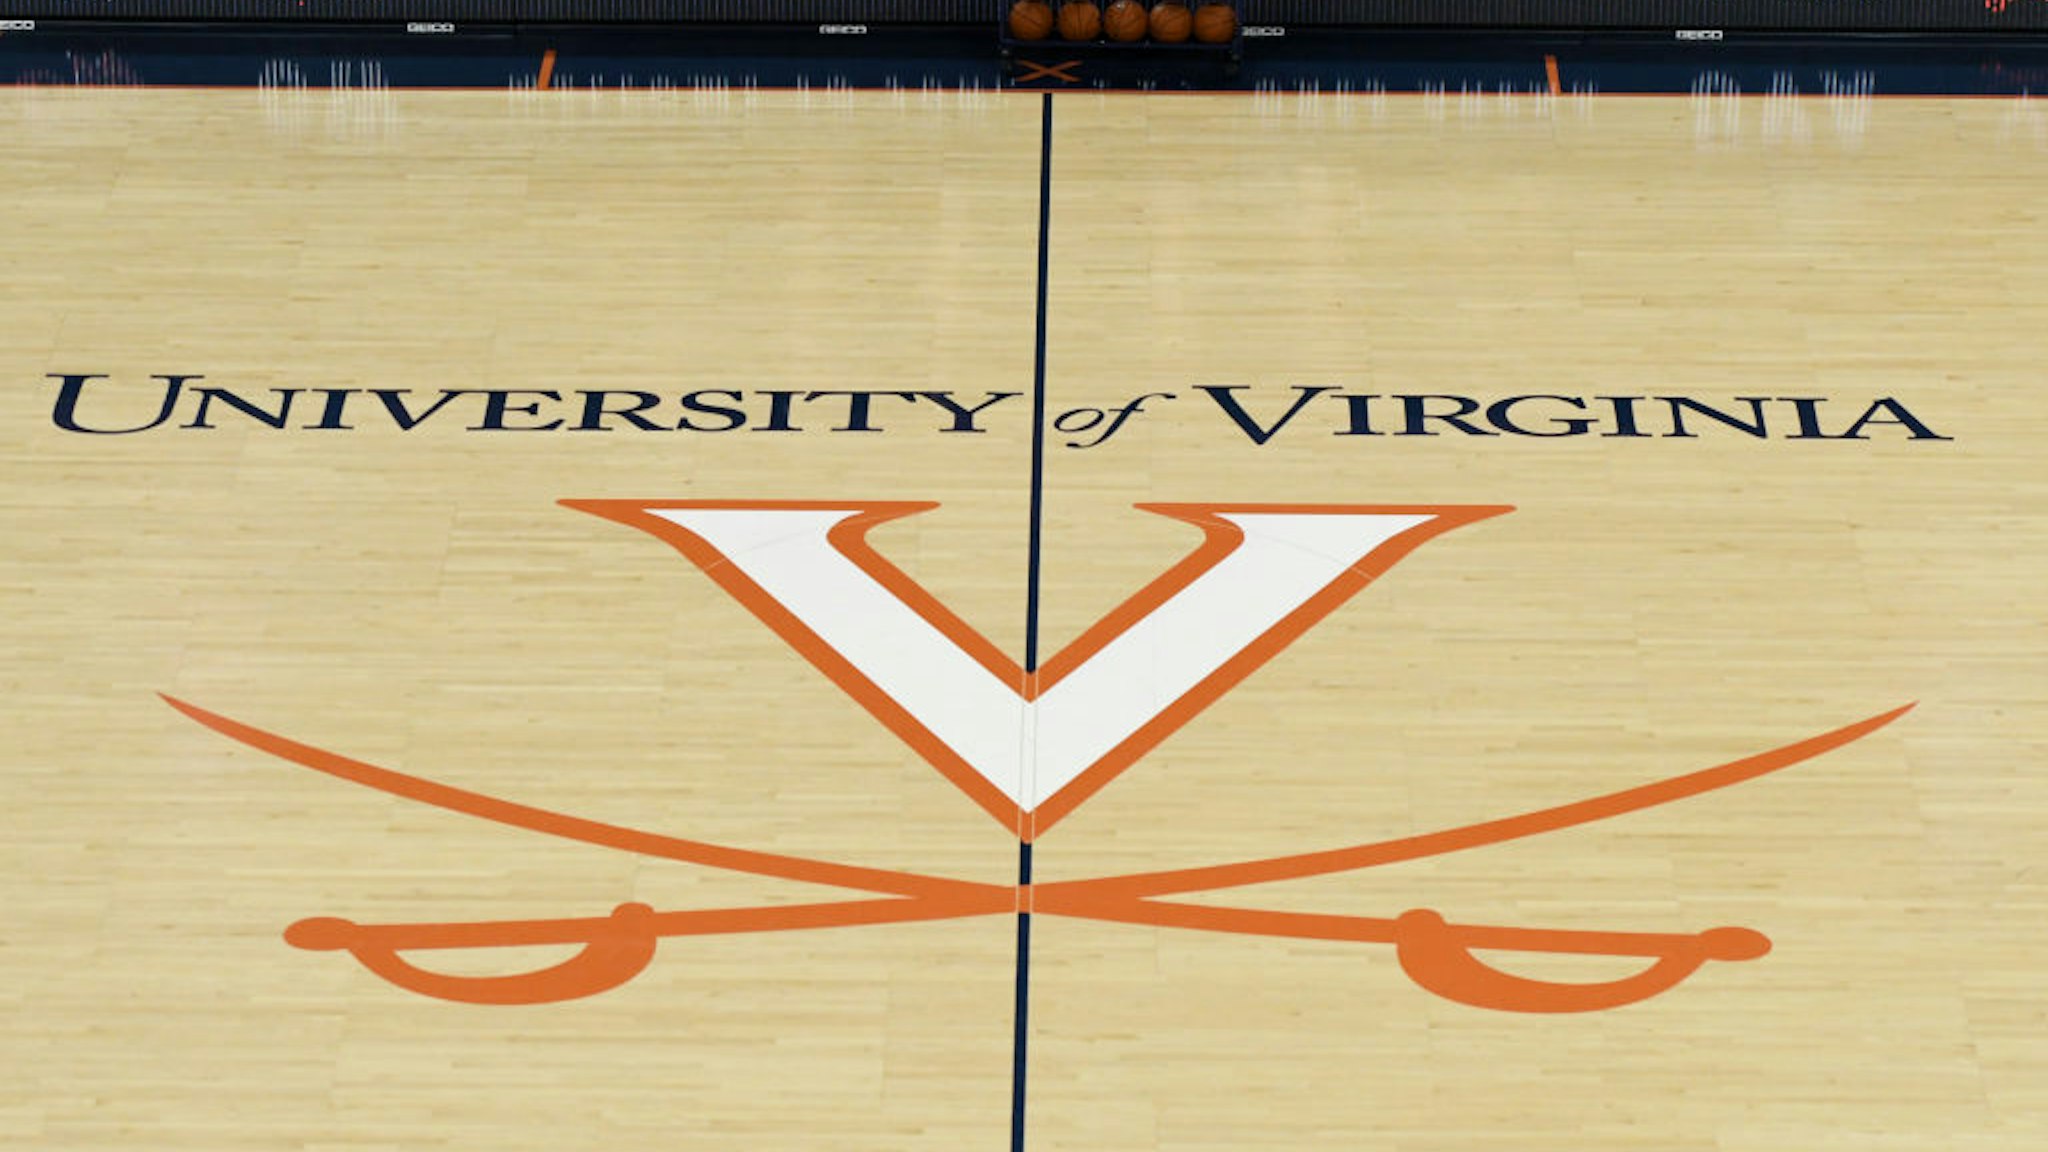 The Virginia Cavaliers logo on the floor before a college basketball game against the George Washington Colonials at the John Paul Jones Arena on November 11, 2018 in Charlottesville, Virginia.